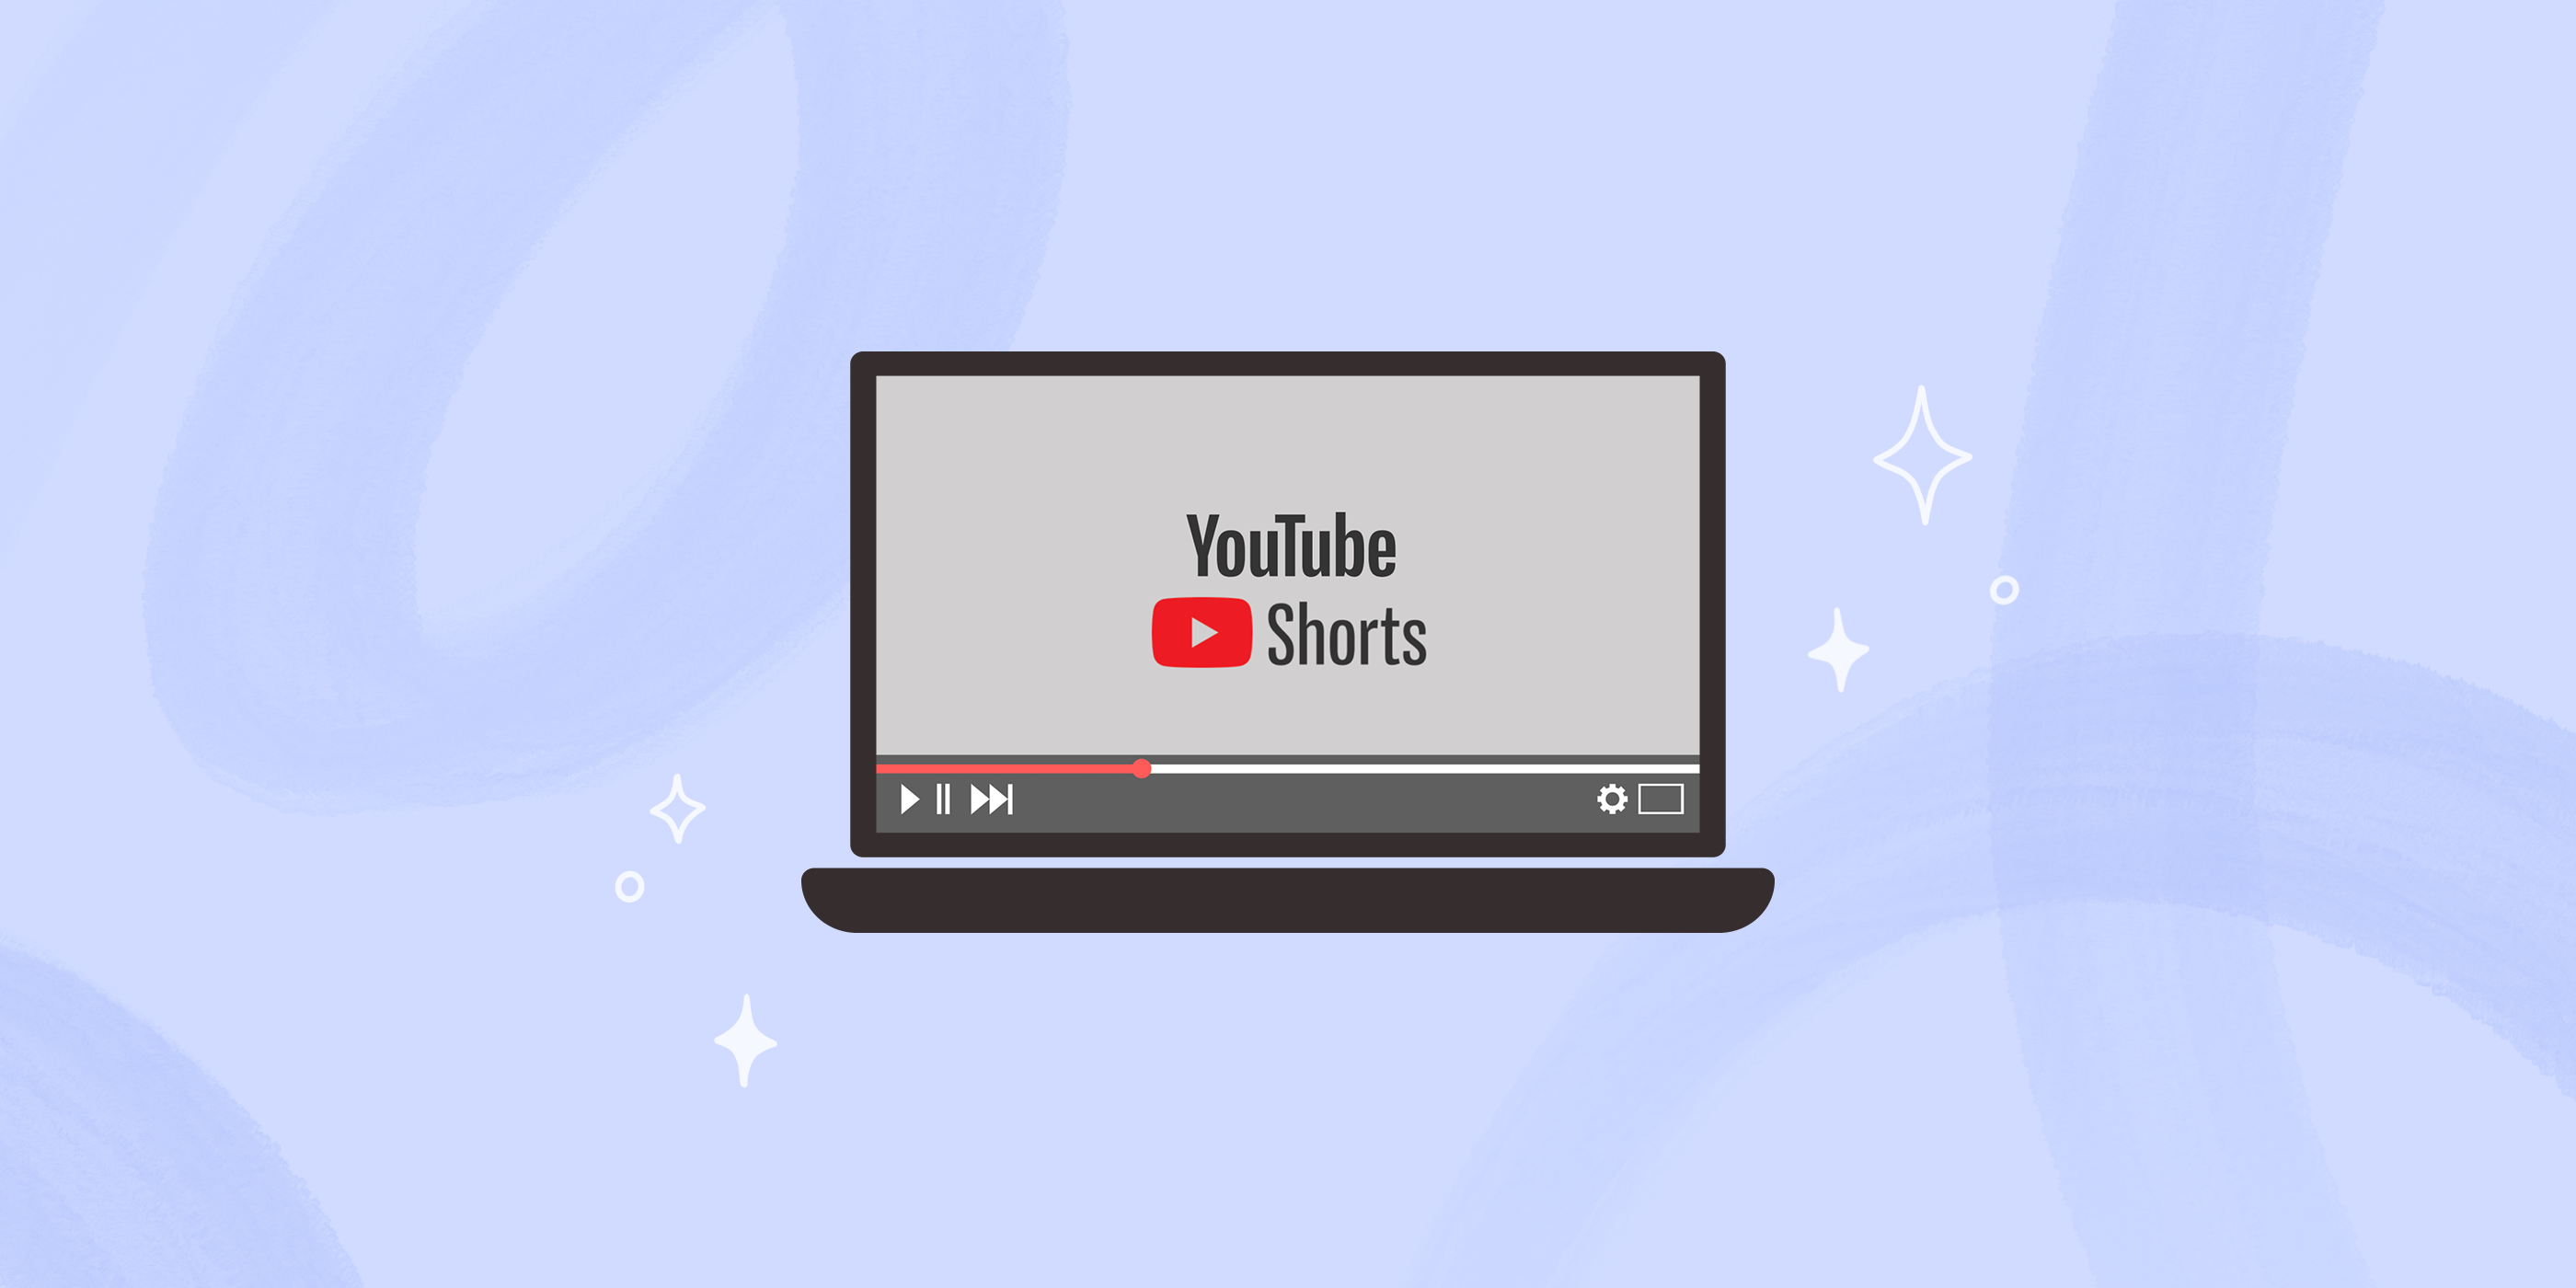 Read about How to Make YouTube Shorts, on PLANOLY